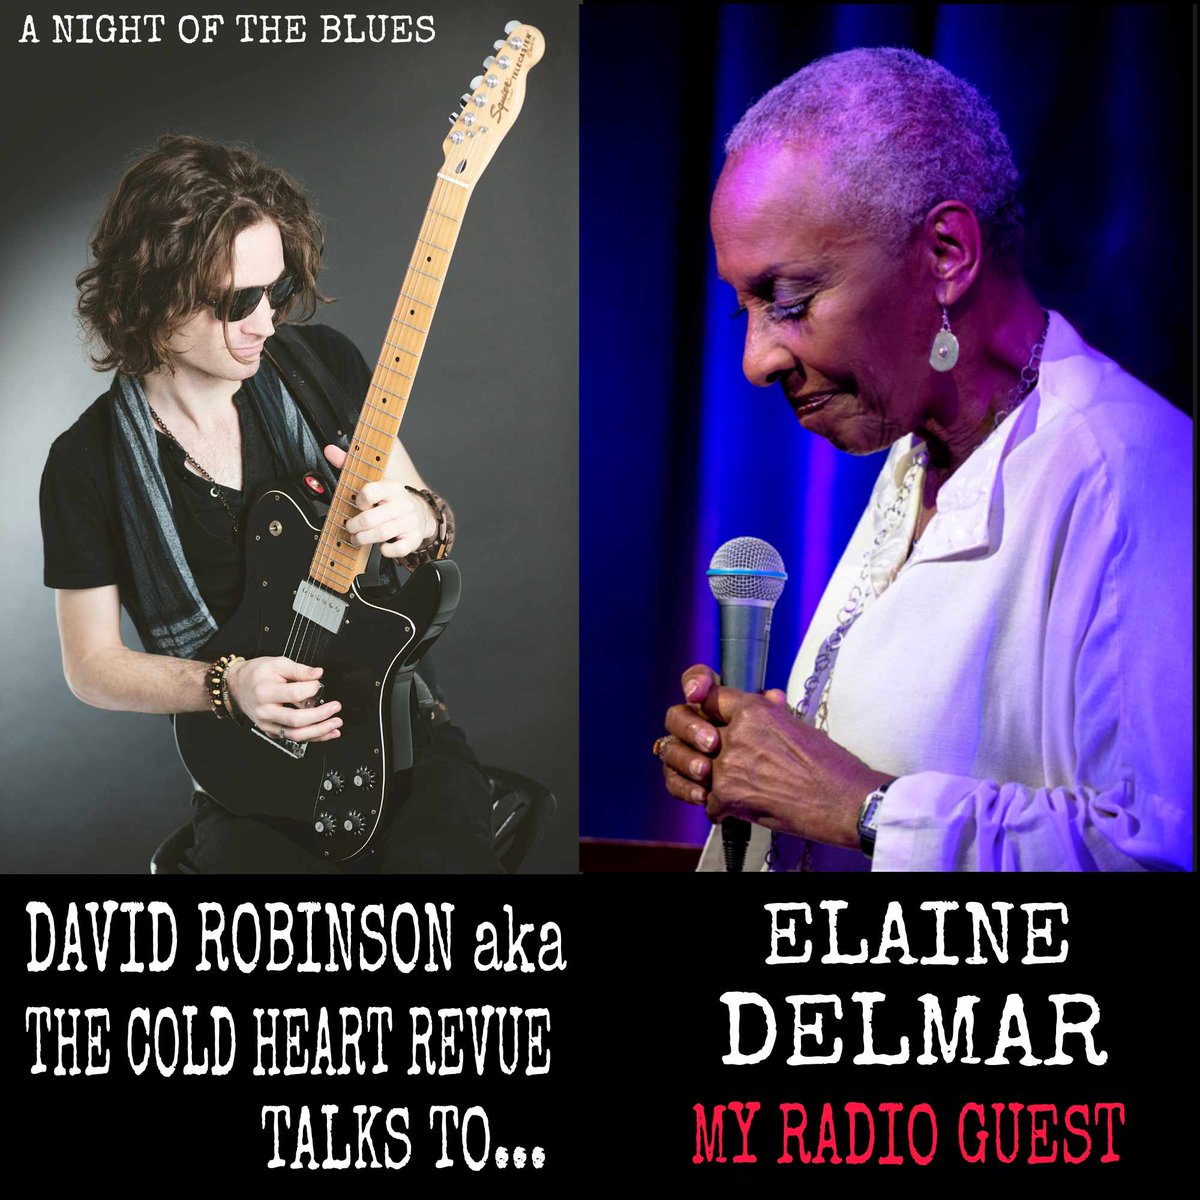 RADIO: my interview guest is Elaine Delmar. Born in 1939 - a masterful British jazz and blues vocalist - recognised for her work with the BBC and the National Theatre. David Robinson aka @coldheartrevue A Night of the Blues. #blues #jazz #singer #vocalist #radio